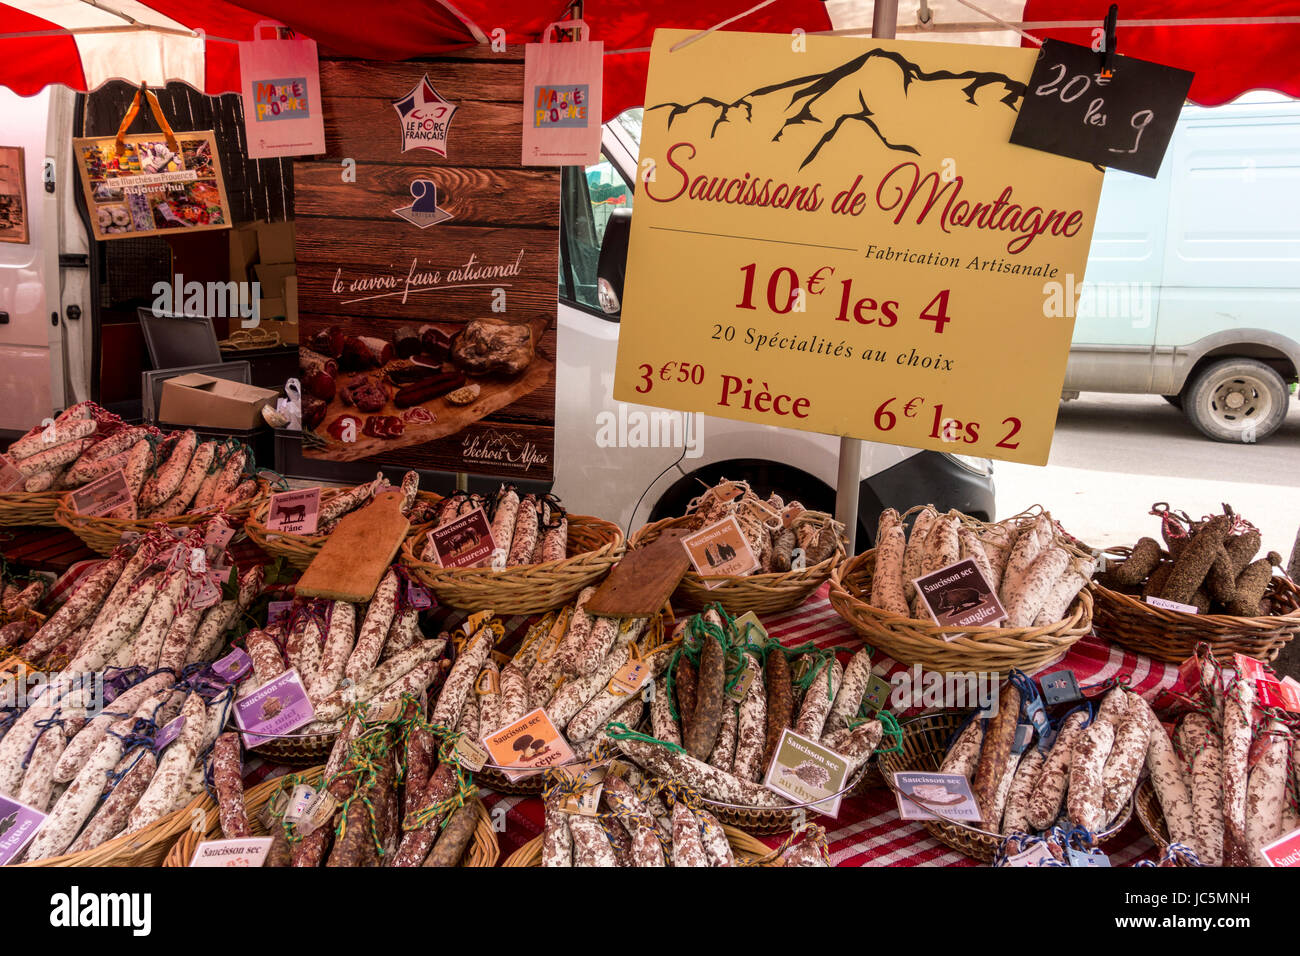 Artisanal Saucisson (dry cured sausages) stall in an outdoor market, Arles, Provence, France Stock Photo